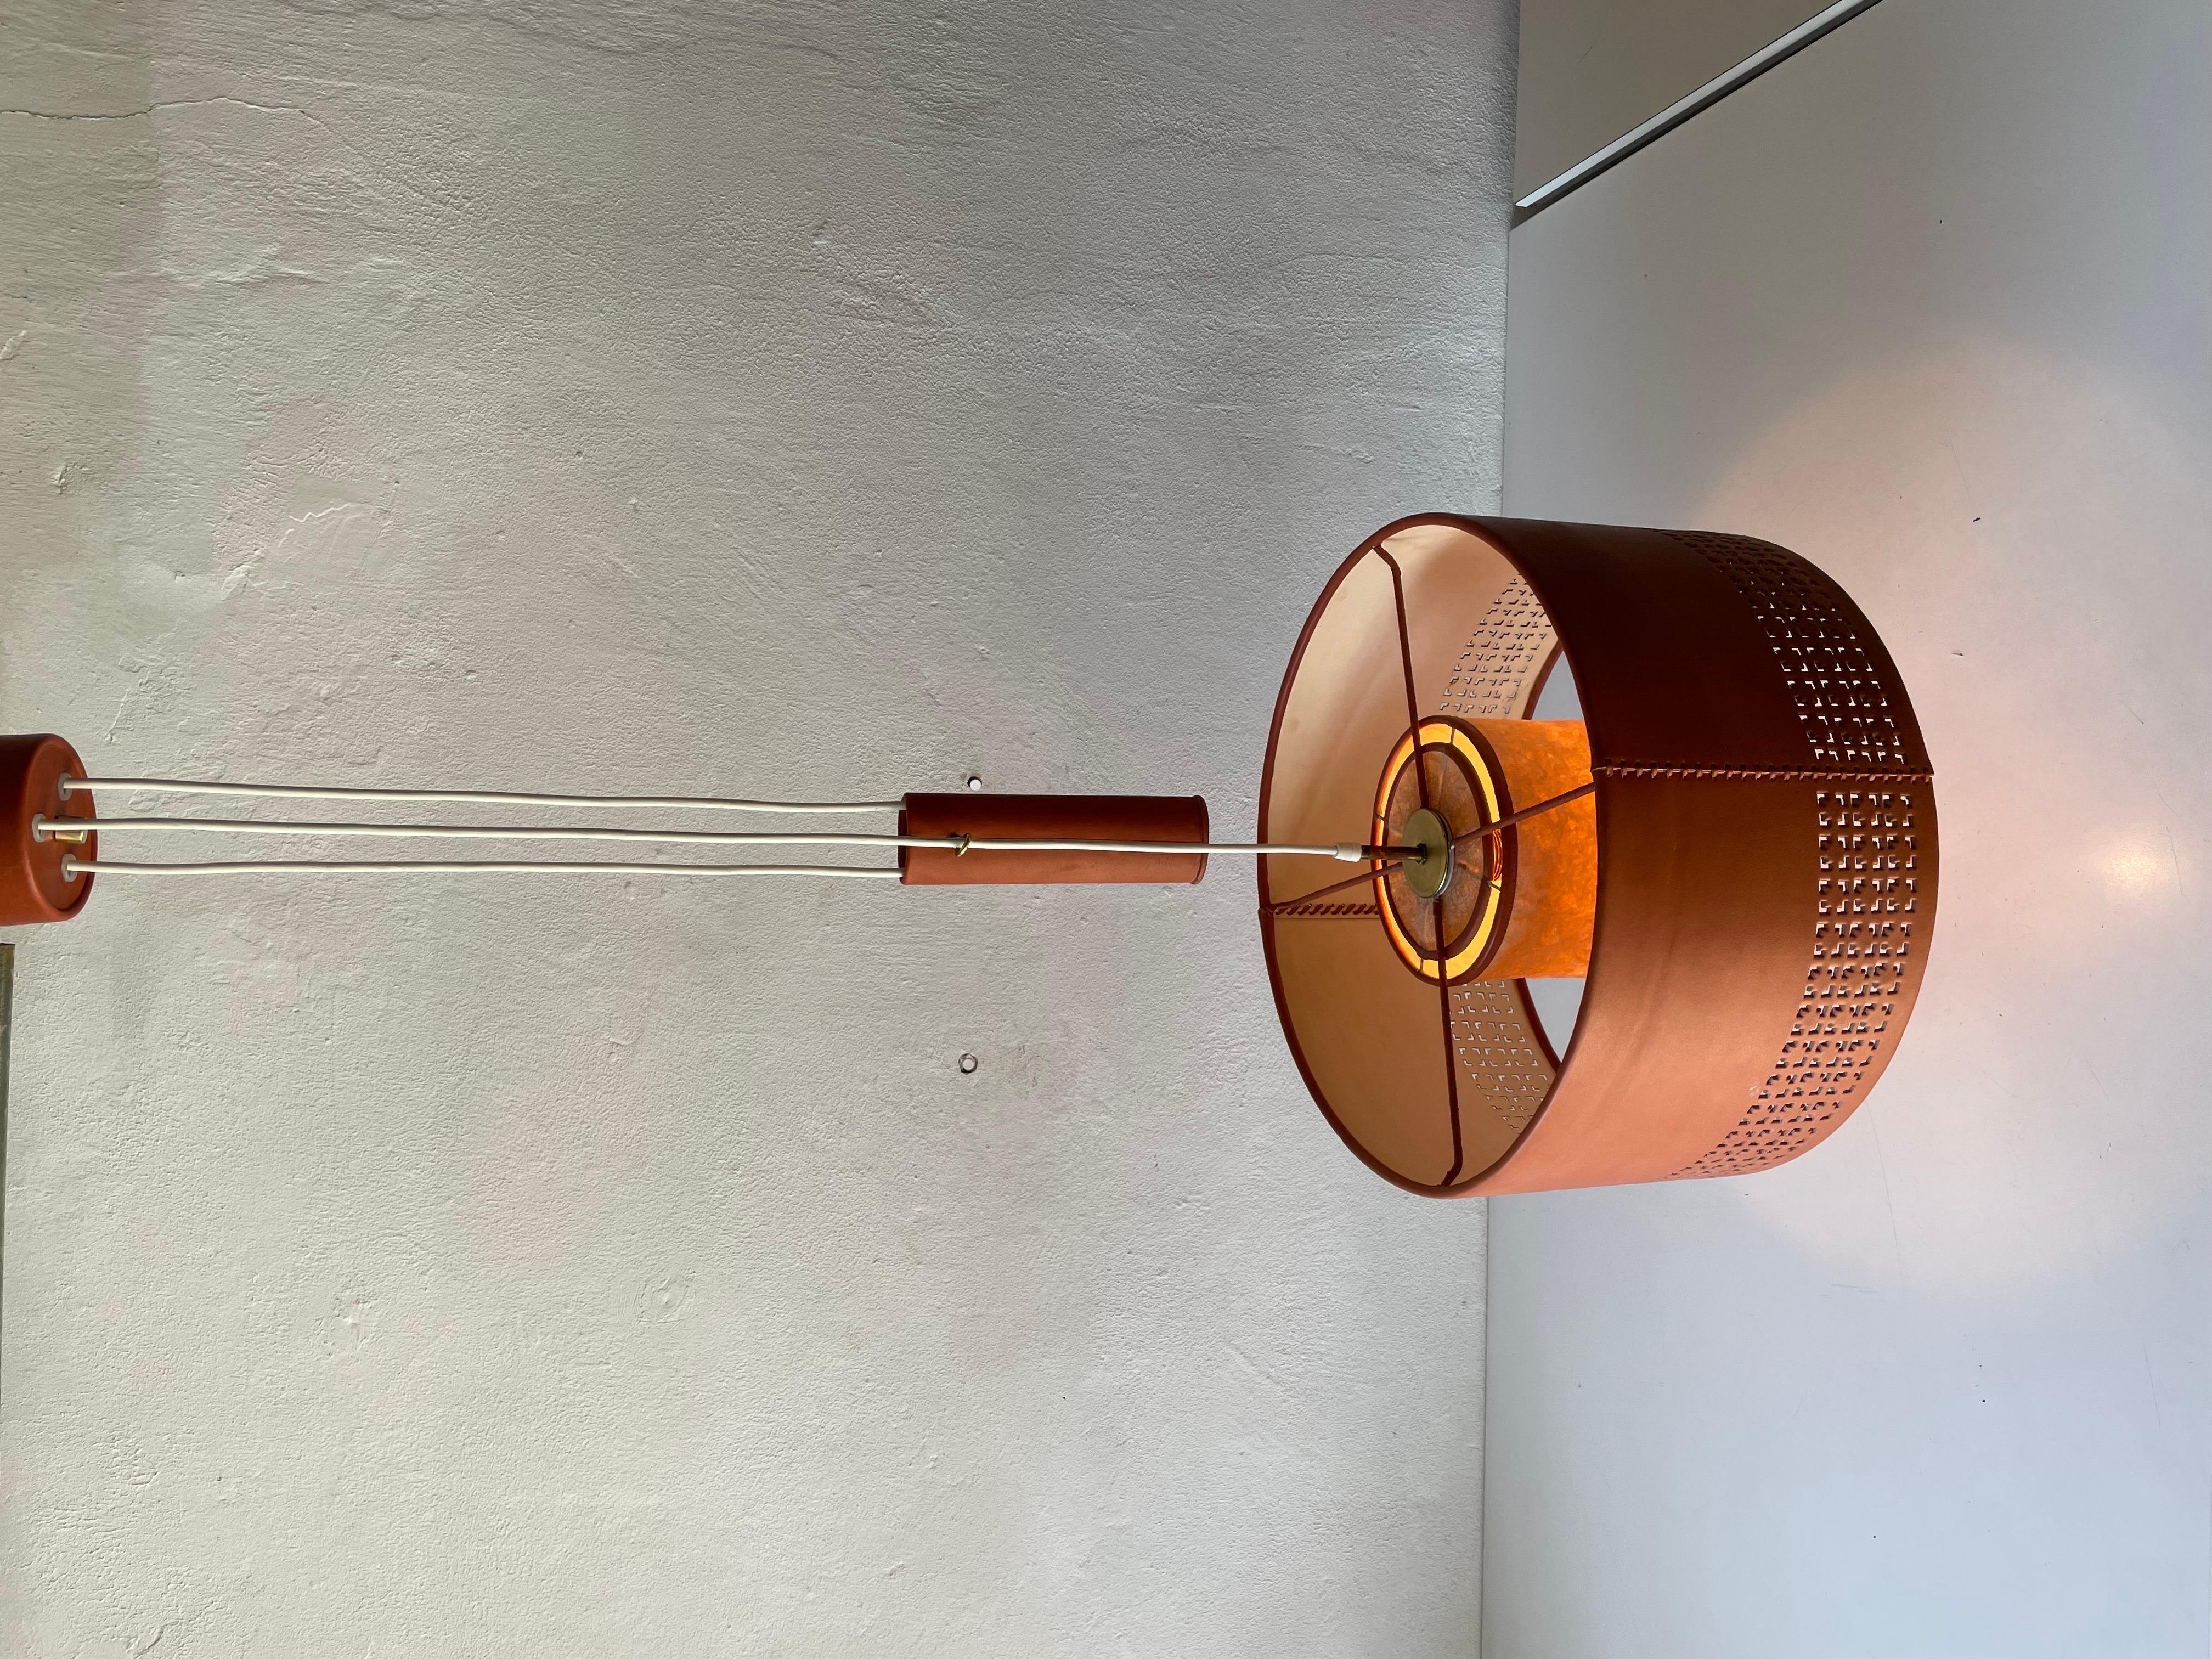 Cylindrical Leather Shade with Motifs Counterweight Pendant Lamp, 1960s, Germany For Sale 11